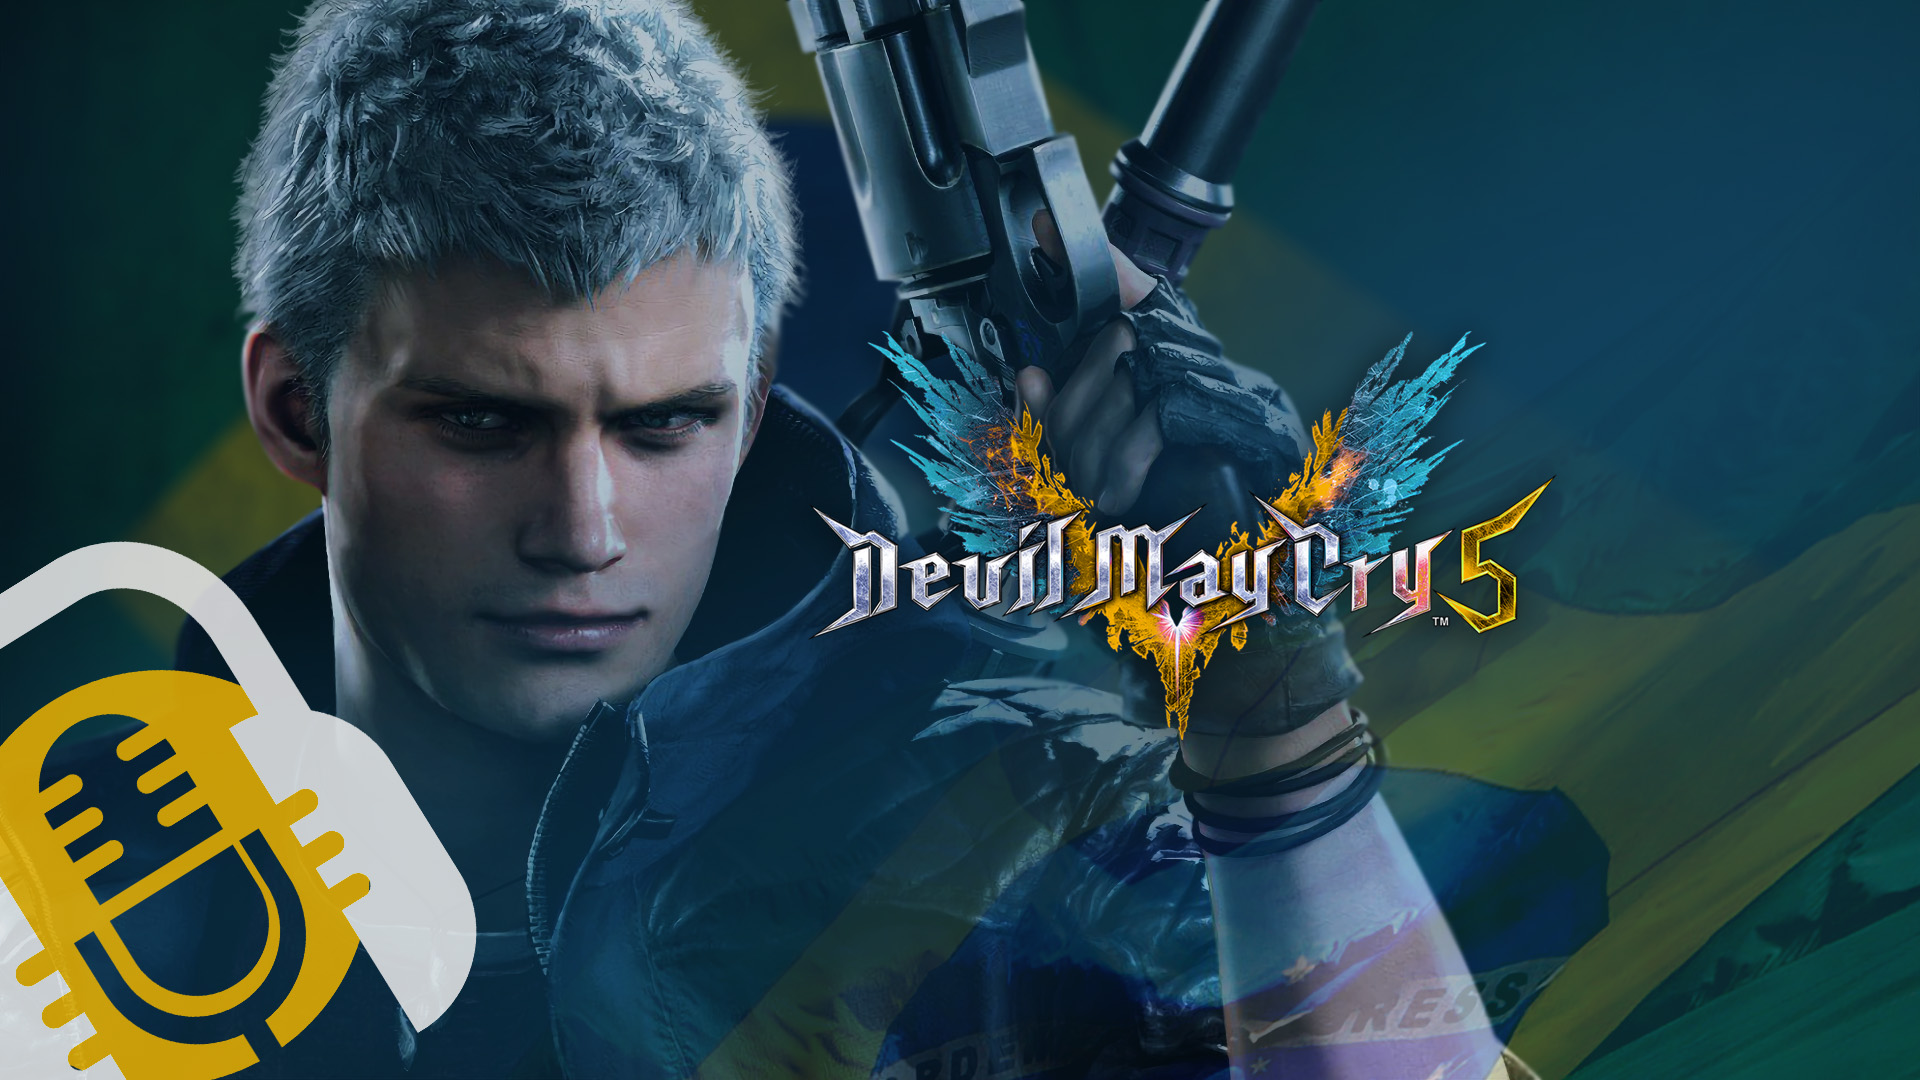 Devil May Cry PT-BR (PLAYSTATION 2)